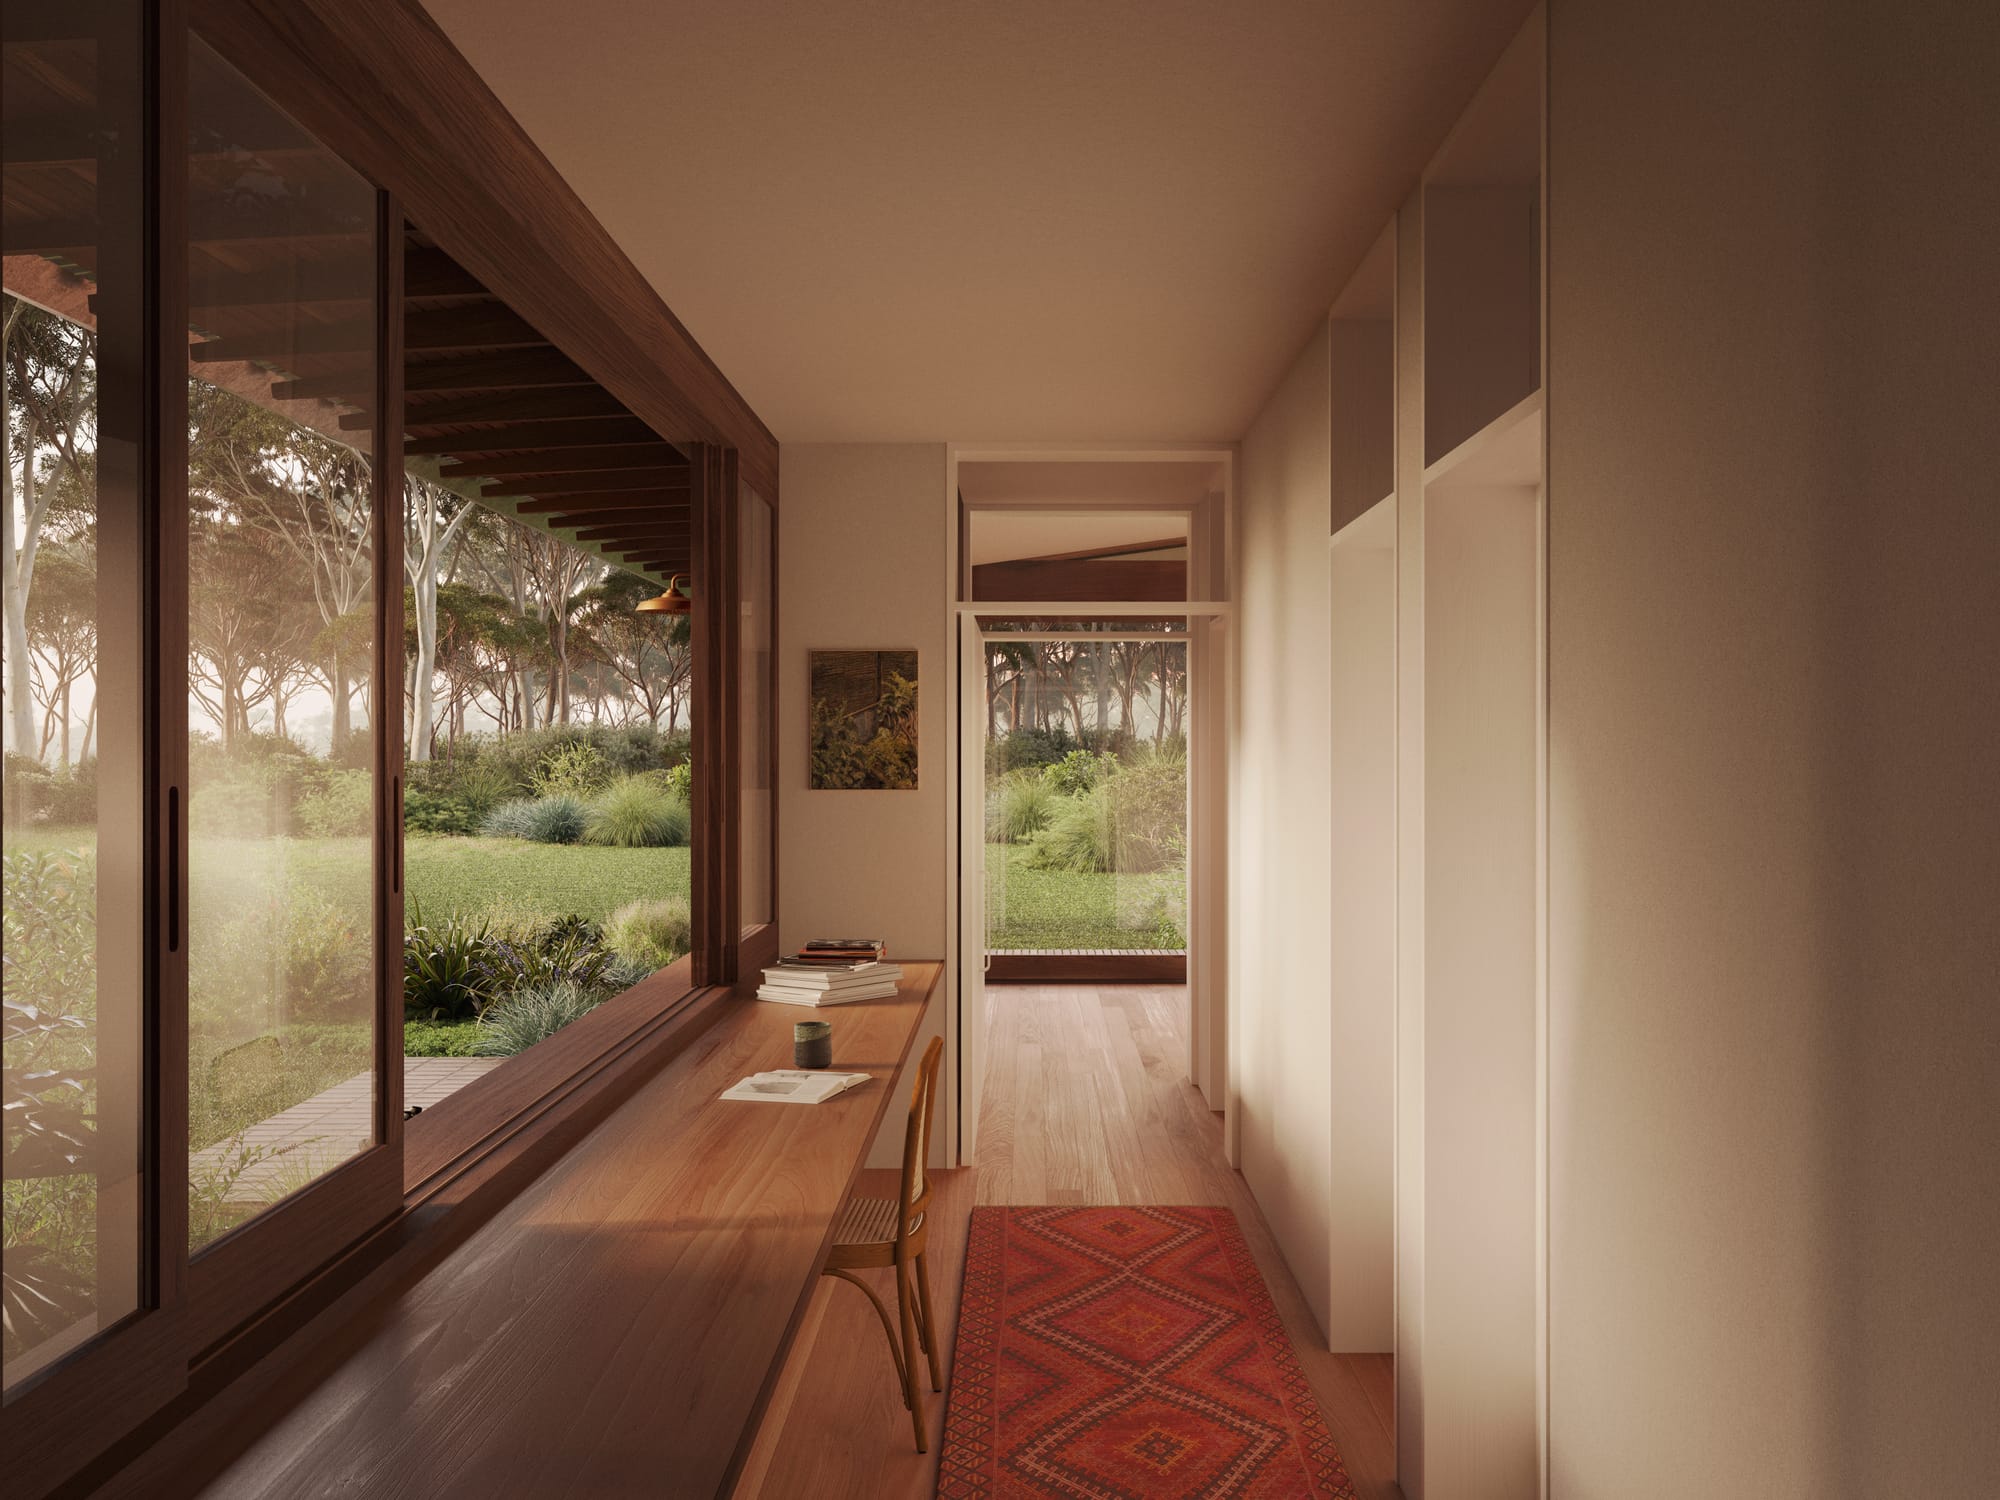 Corymbia House. Renders copyright of CHOIRENDER. Hallway with timber floors and timber desk running length of wall, looking onto garden and grass. White walls and floor-to-ceiling windows at end of hall.